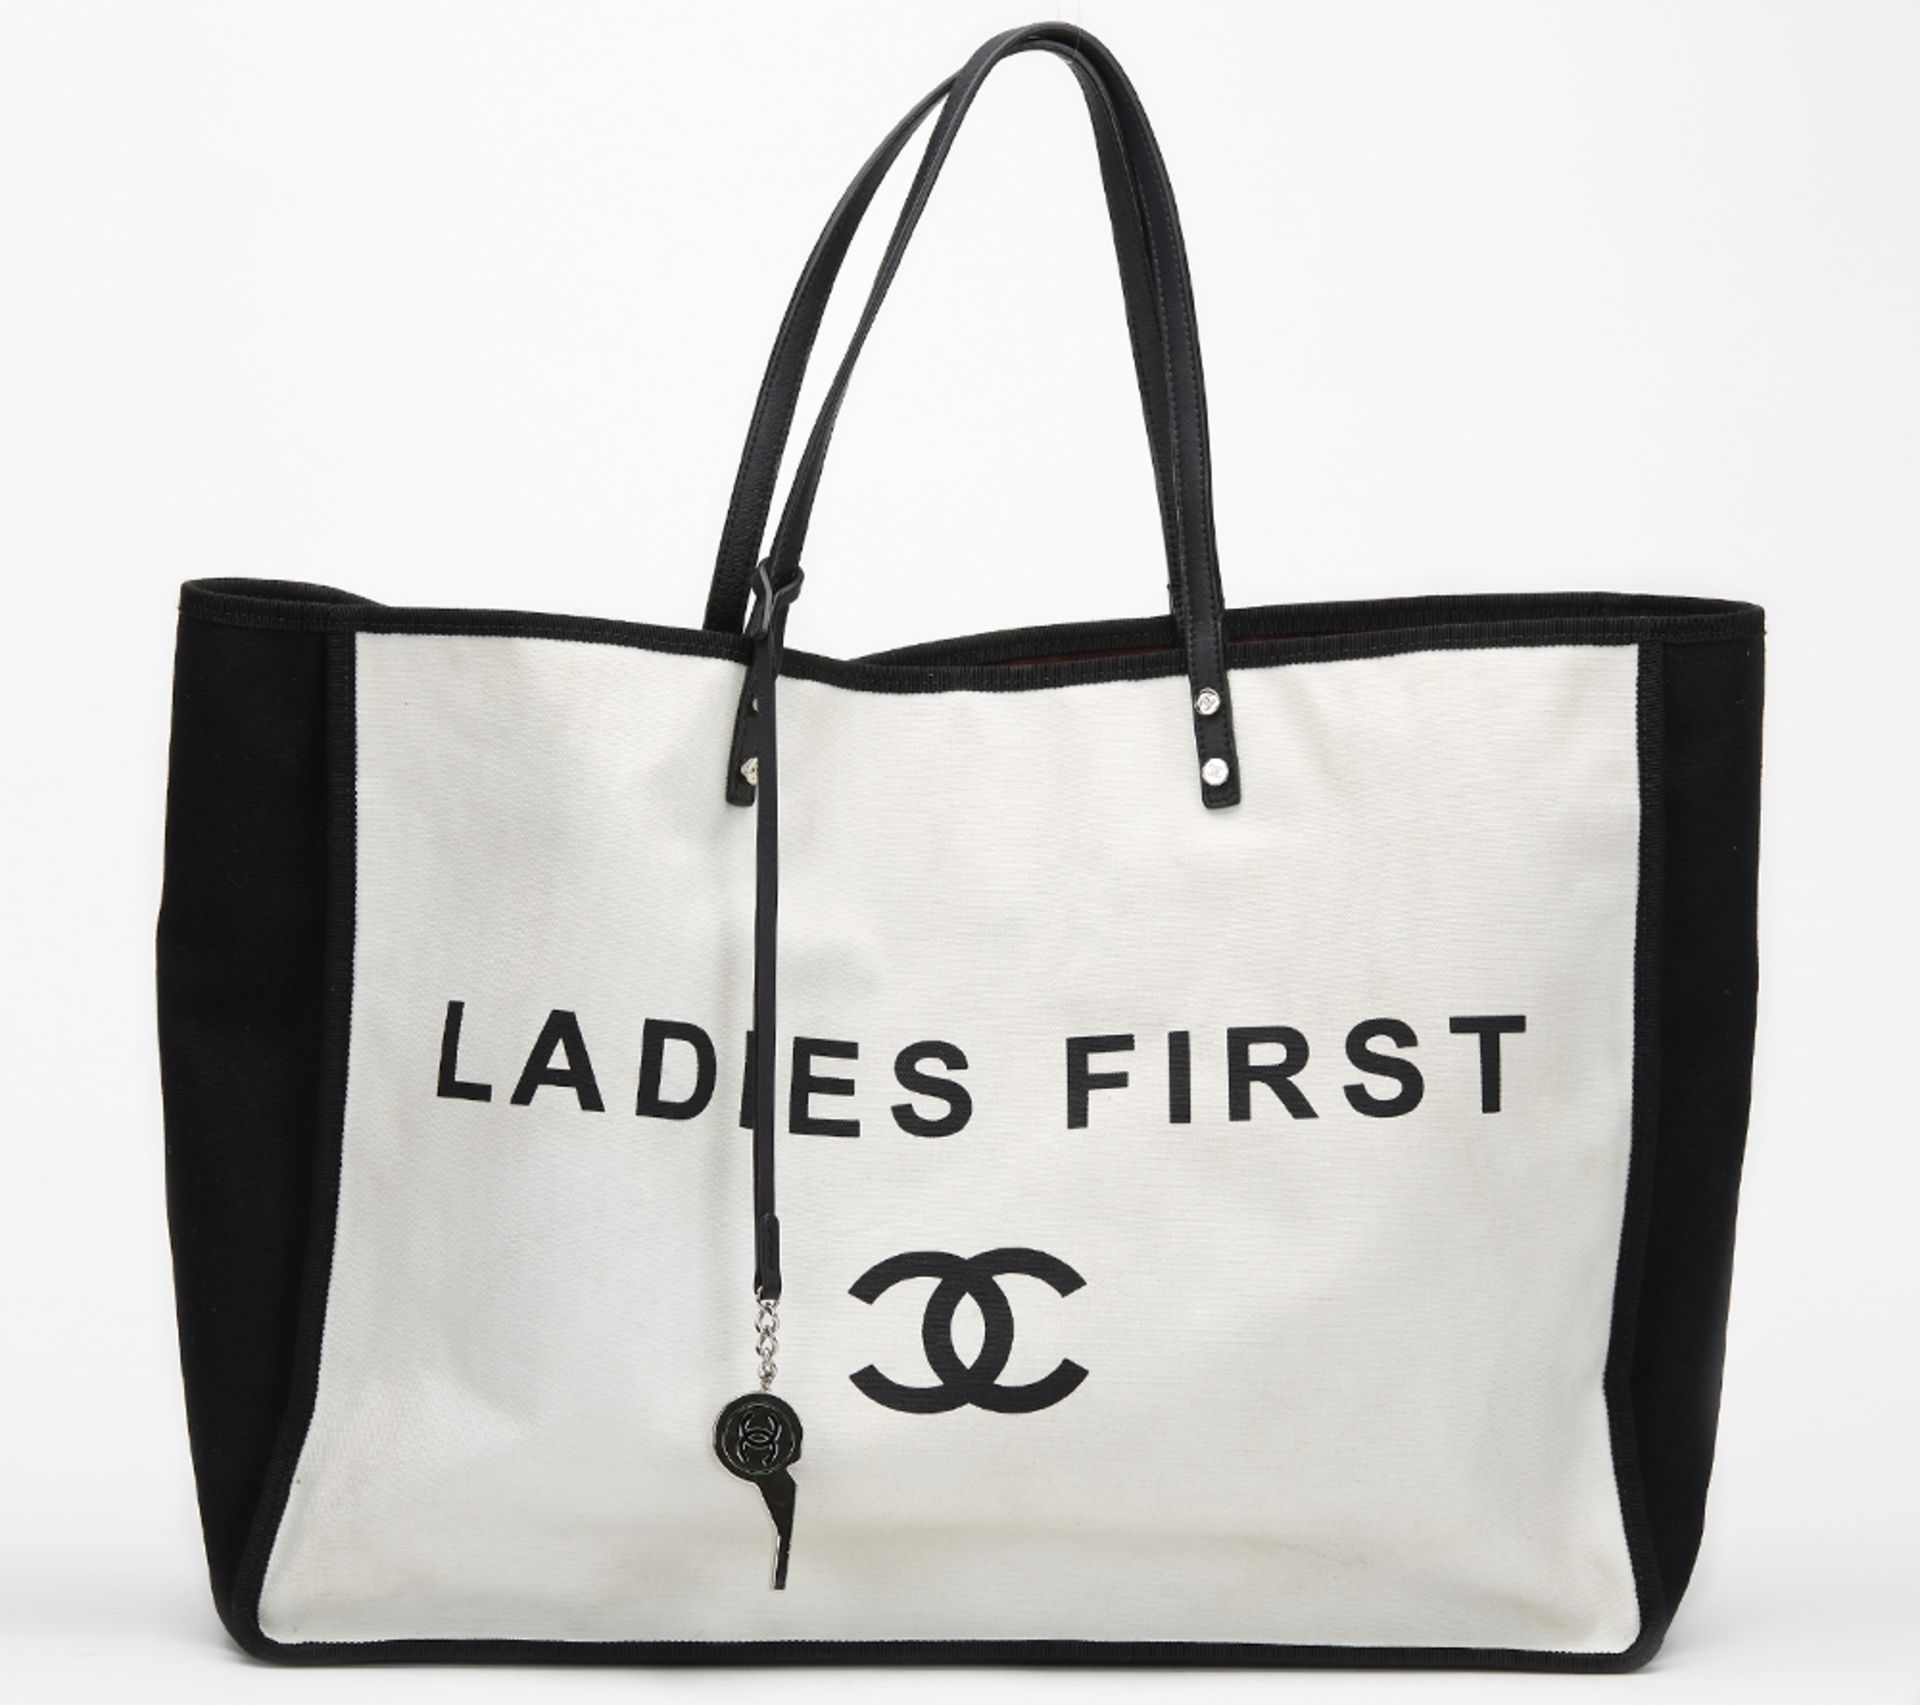 Chanel Ladies First Shopper Tote